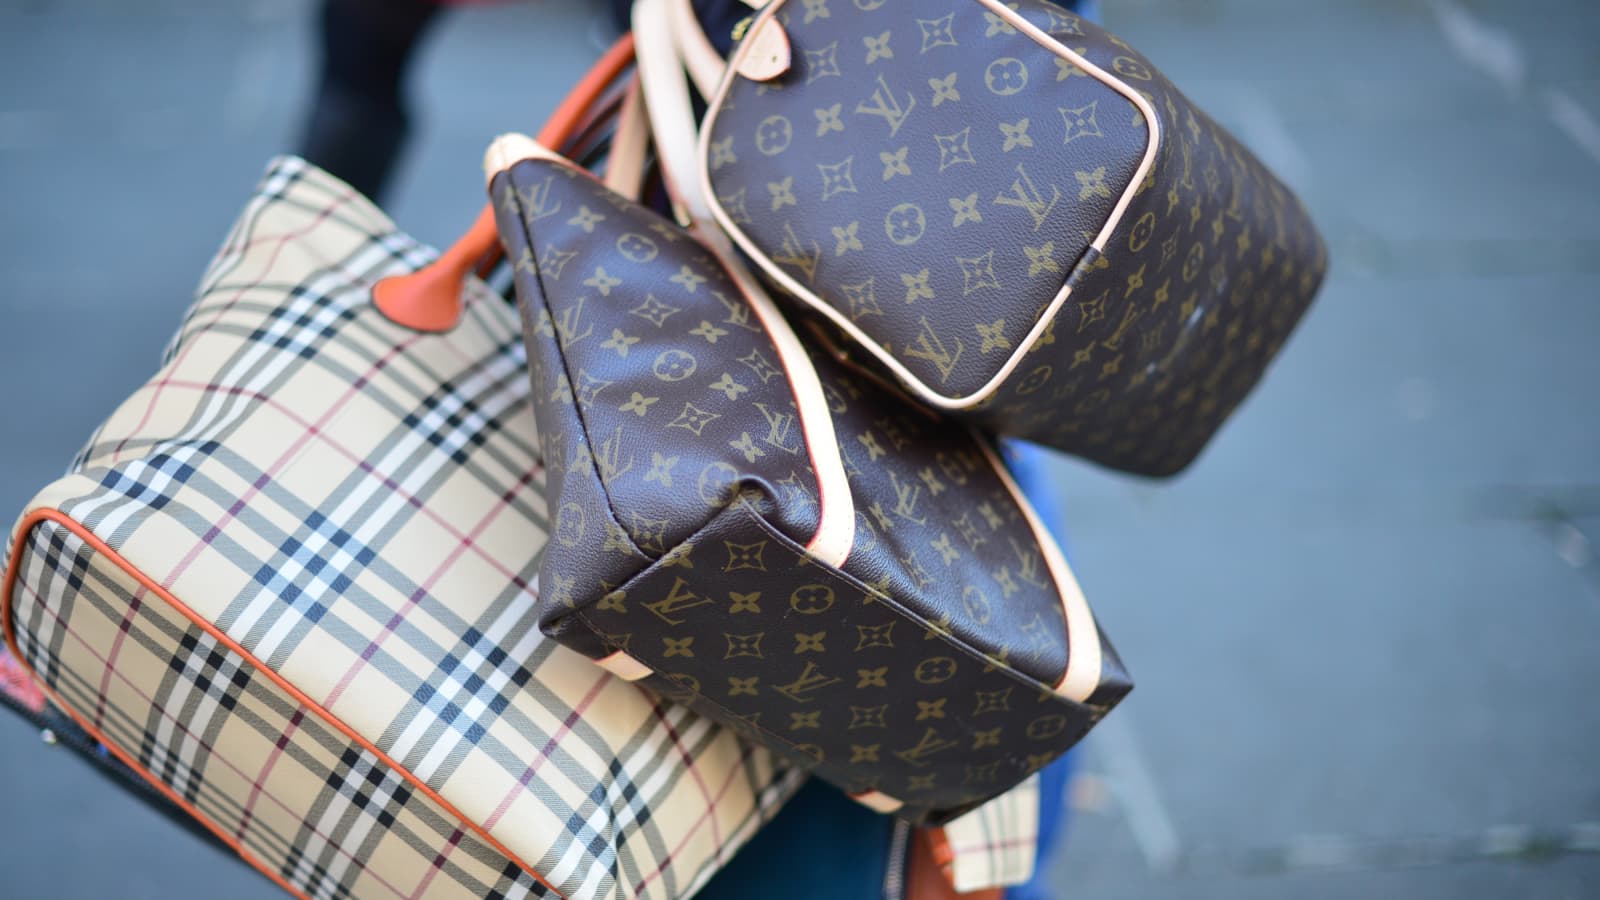 Louis Vuitton joins China's Alibaba to fight counterfeit